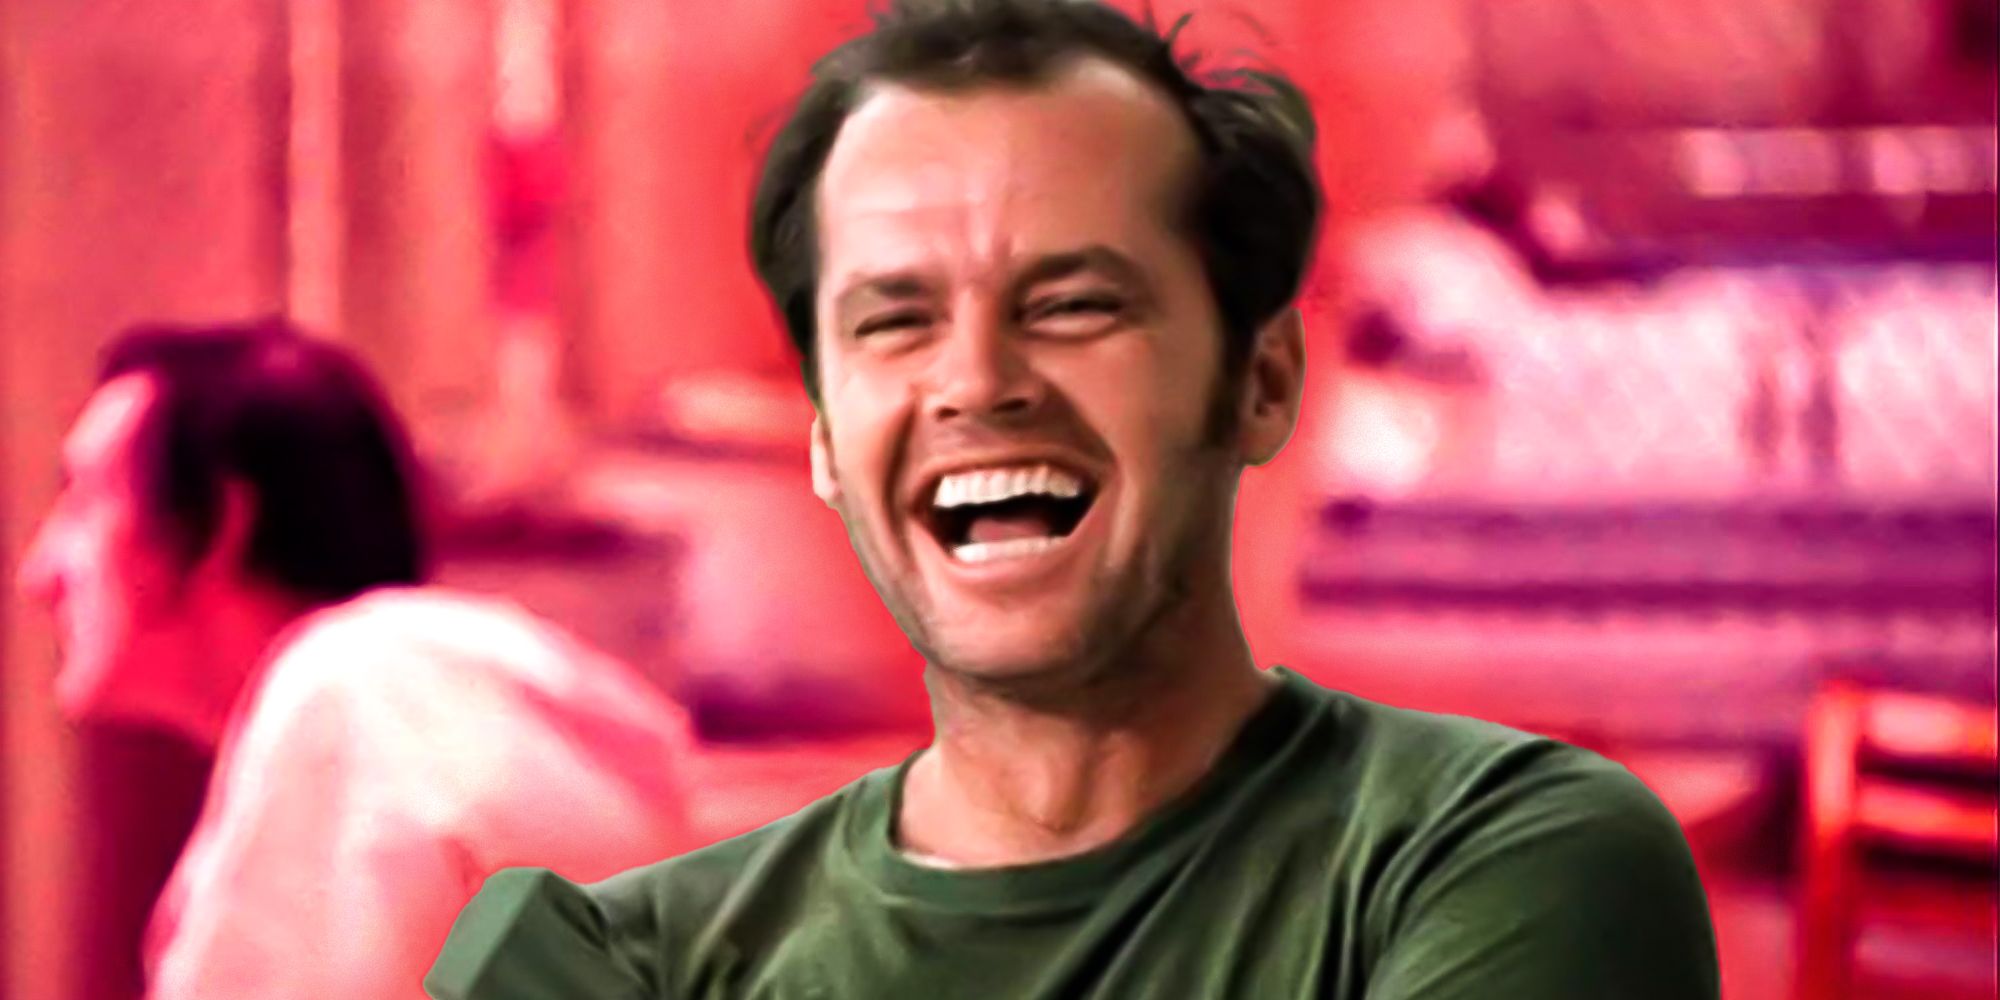 Jack Nicholson as RP laughing in One Flew Over the Cuckoo's Nest